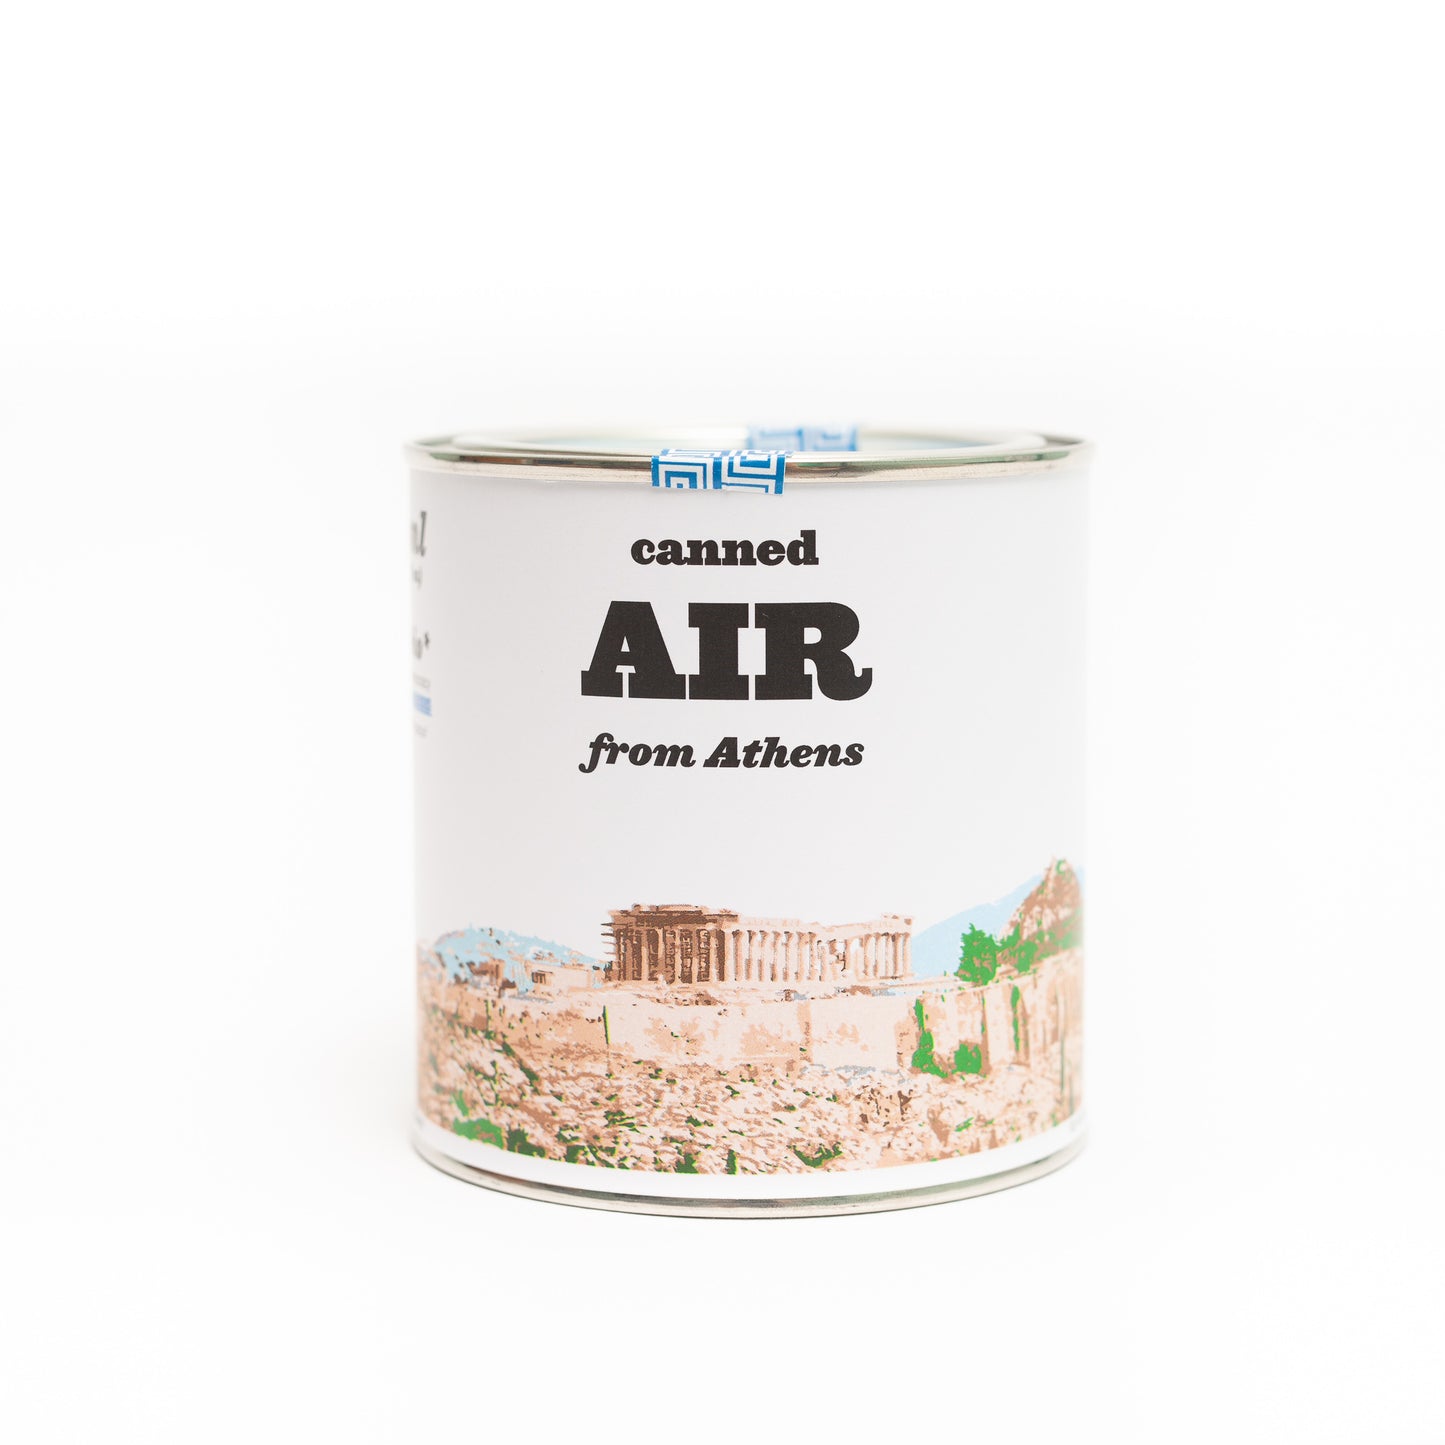 Canned Air from Athens